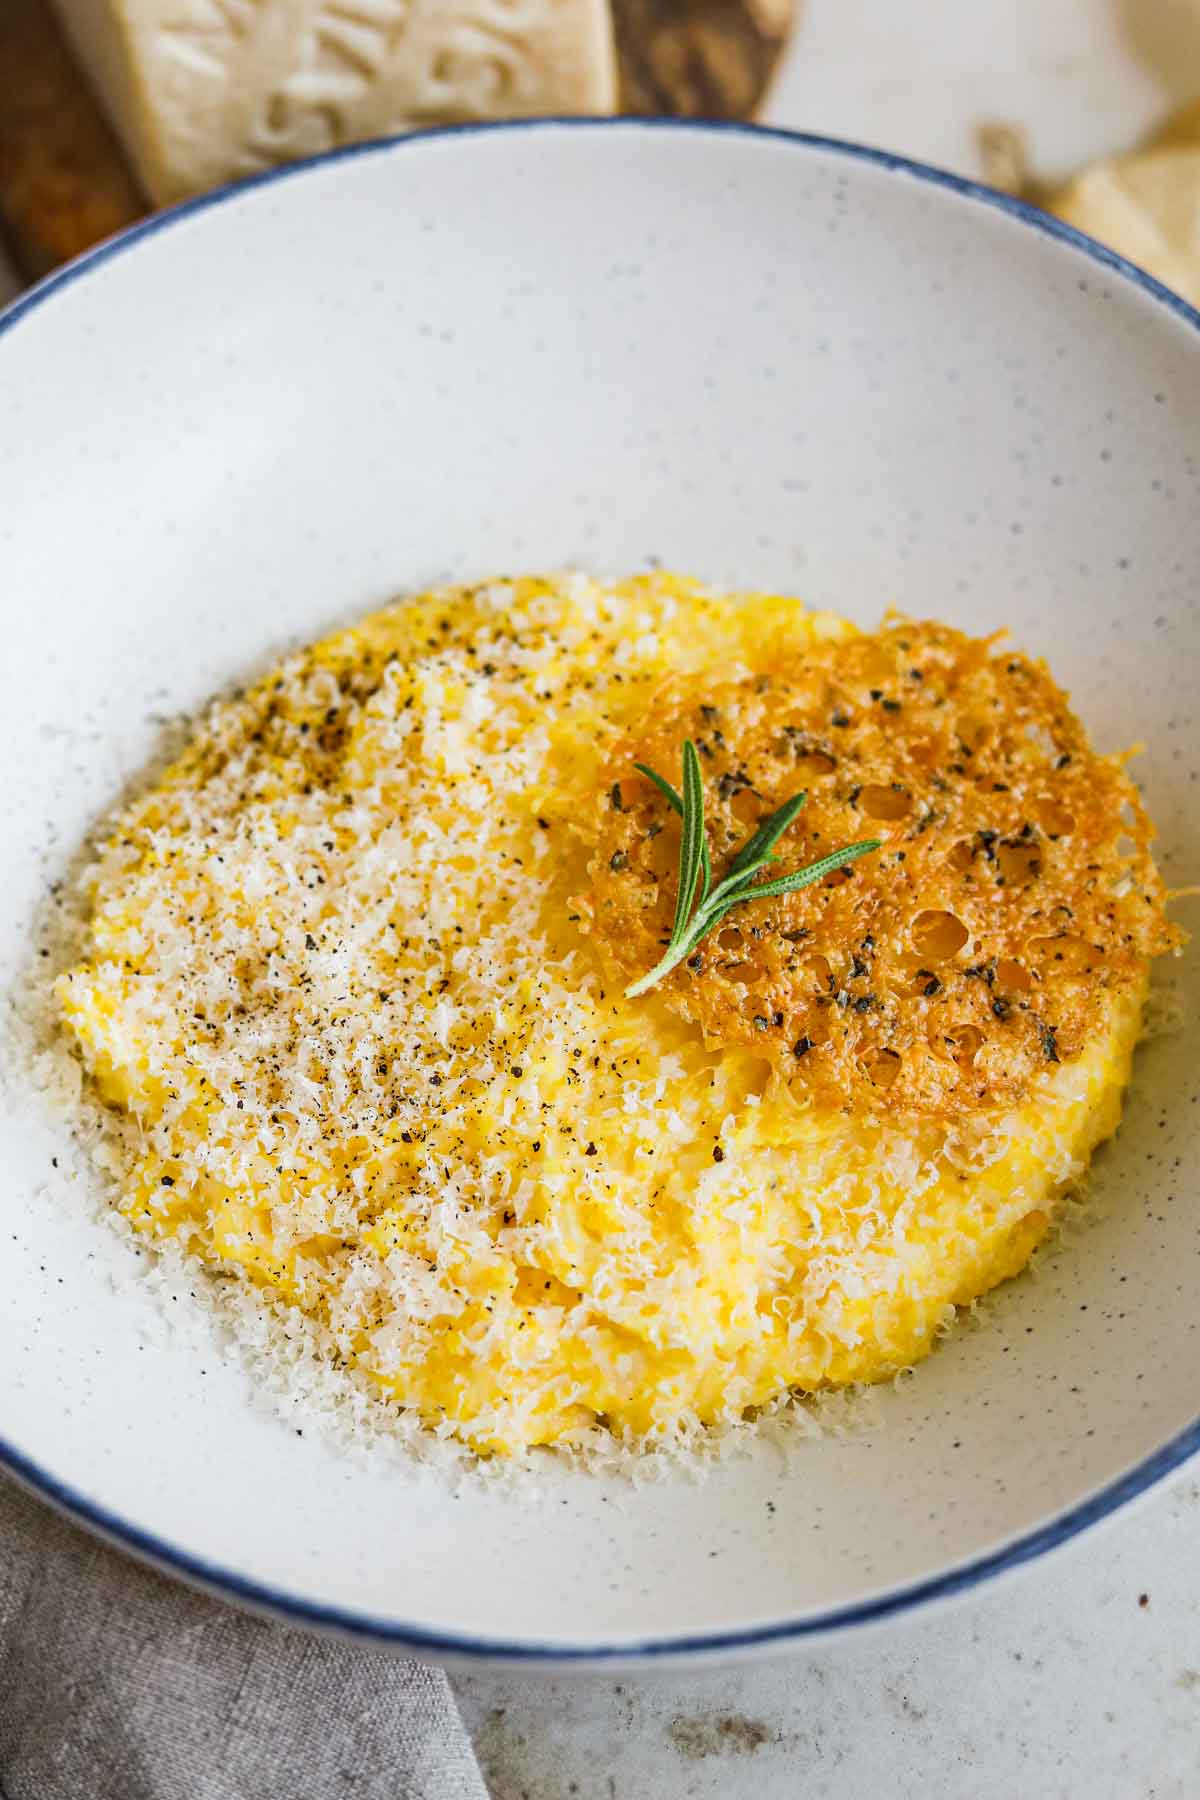 Velvety, smooth Italian parmesan polenta with grated parmigiano-reggiano, rosemary, and a montasio PDO frico (cheese crisp).